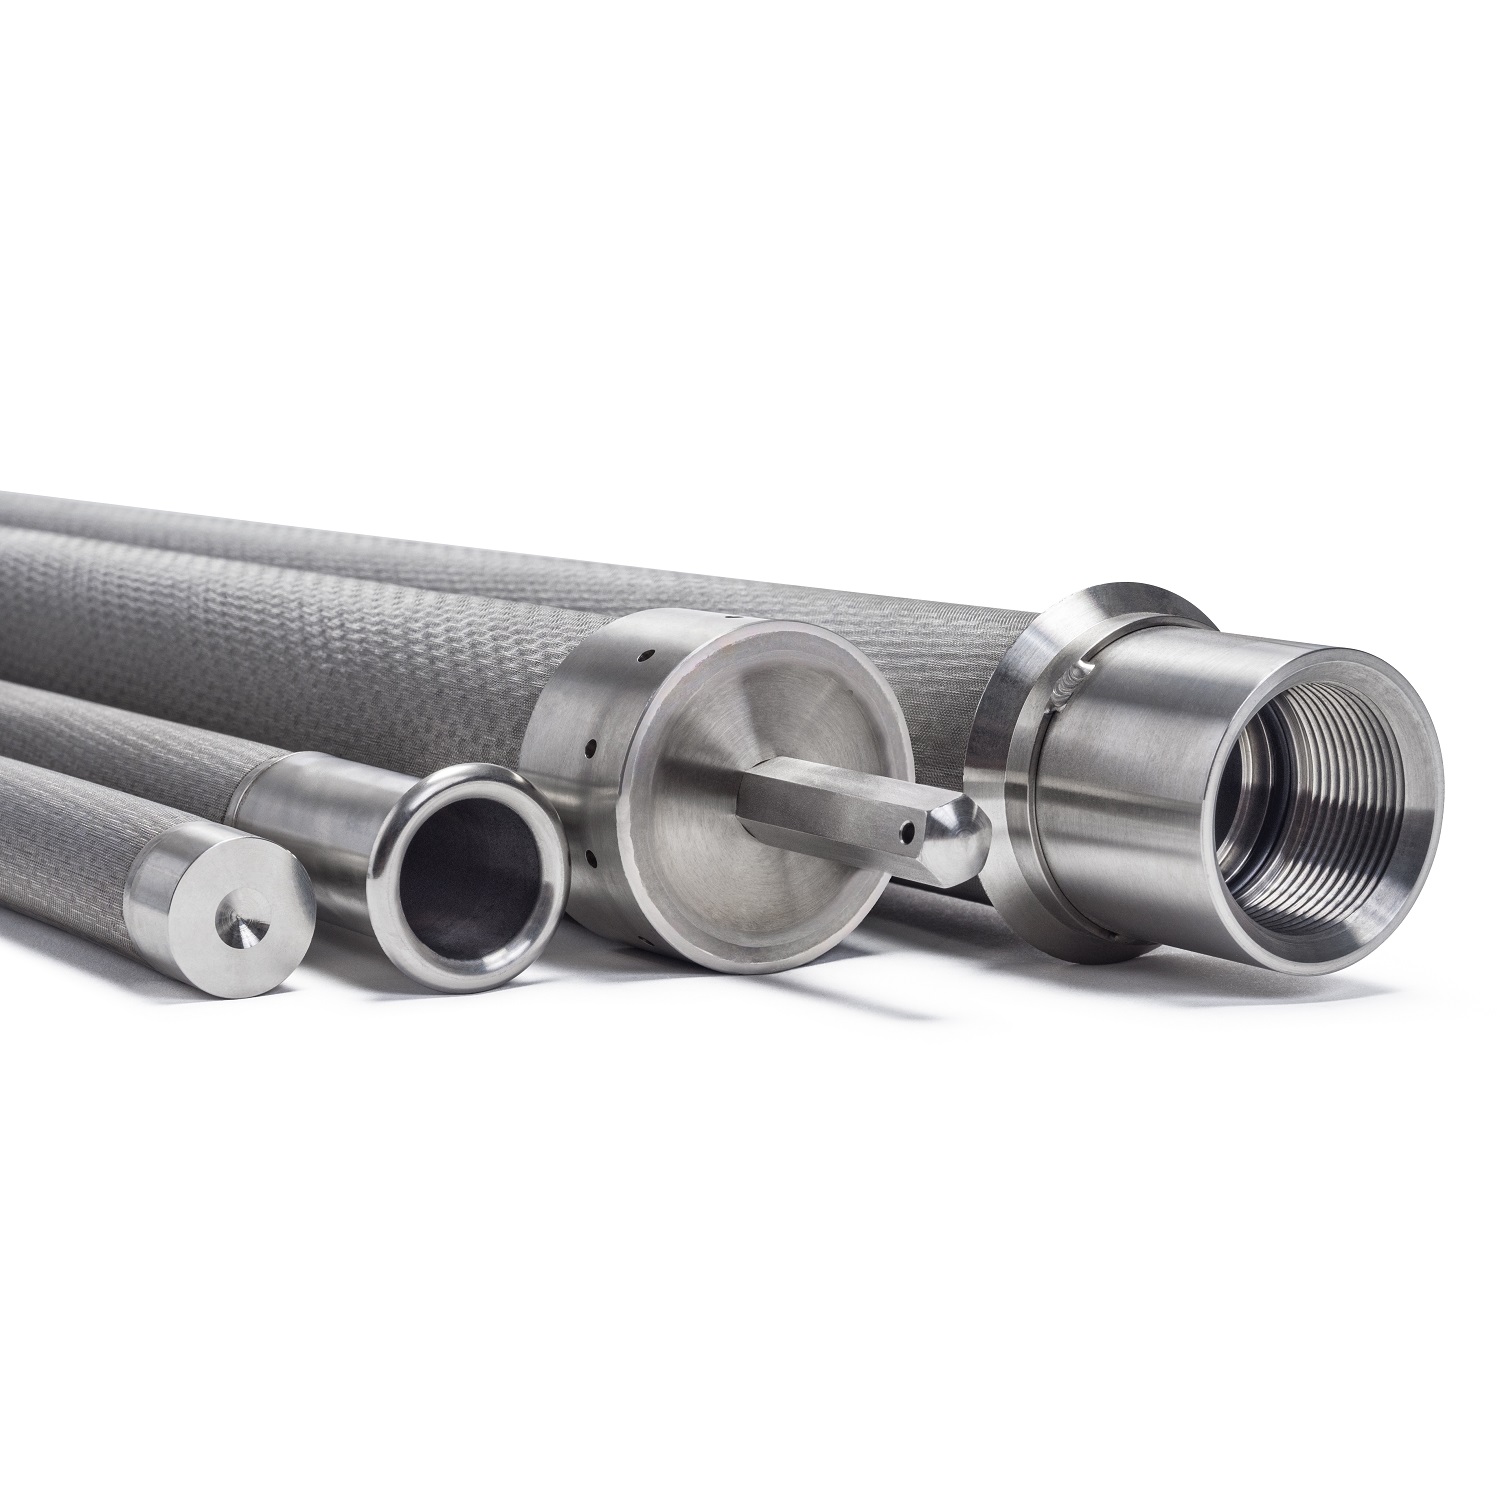 Porvair's Sinterflo MC septa filter elements are designed for nuclear power generating applications.